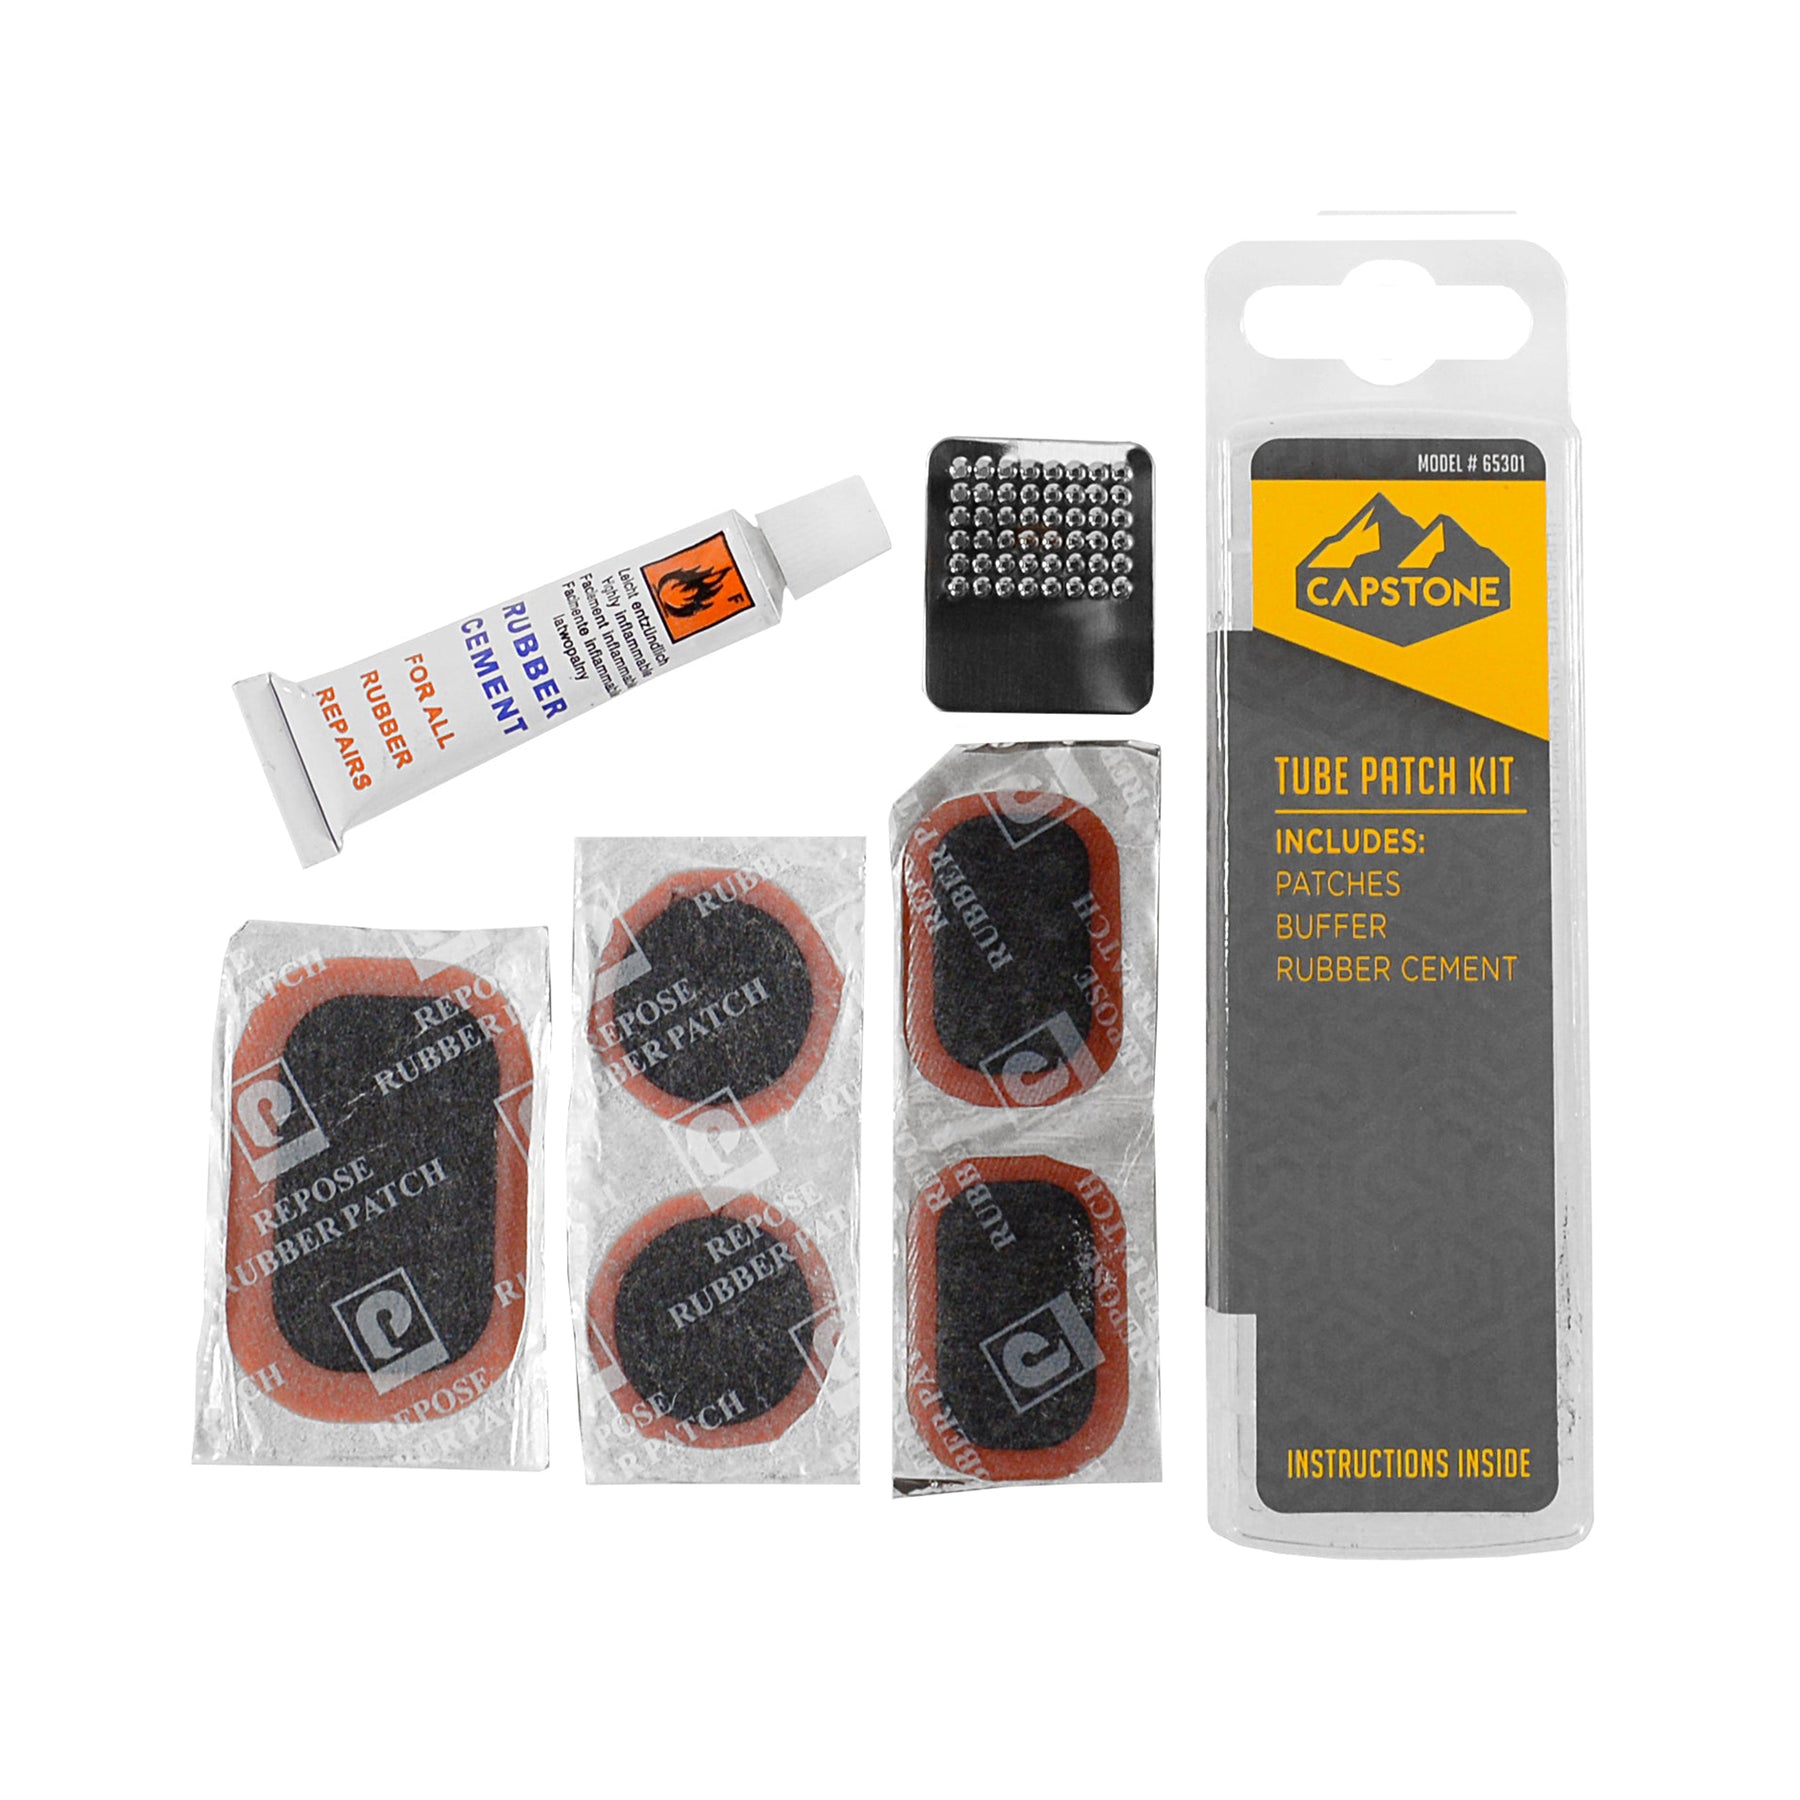 Capstone Tube Patch Kit | Includes 5 Patches, Rubber Cement, & Buffer